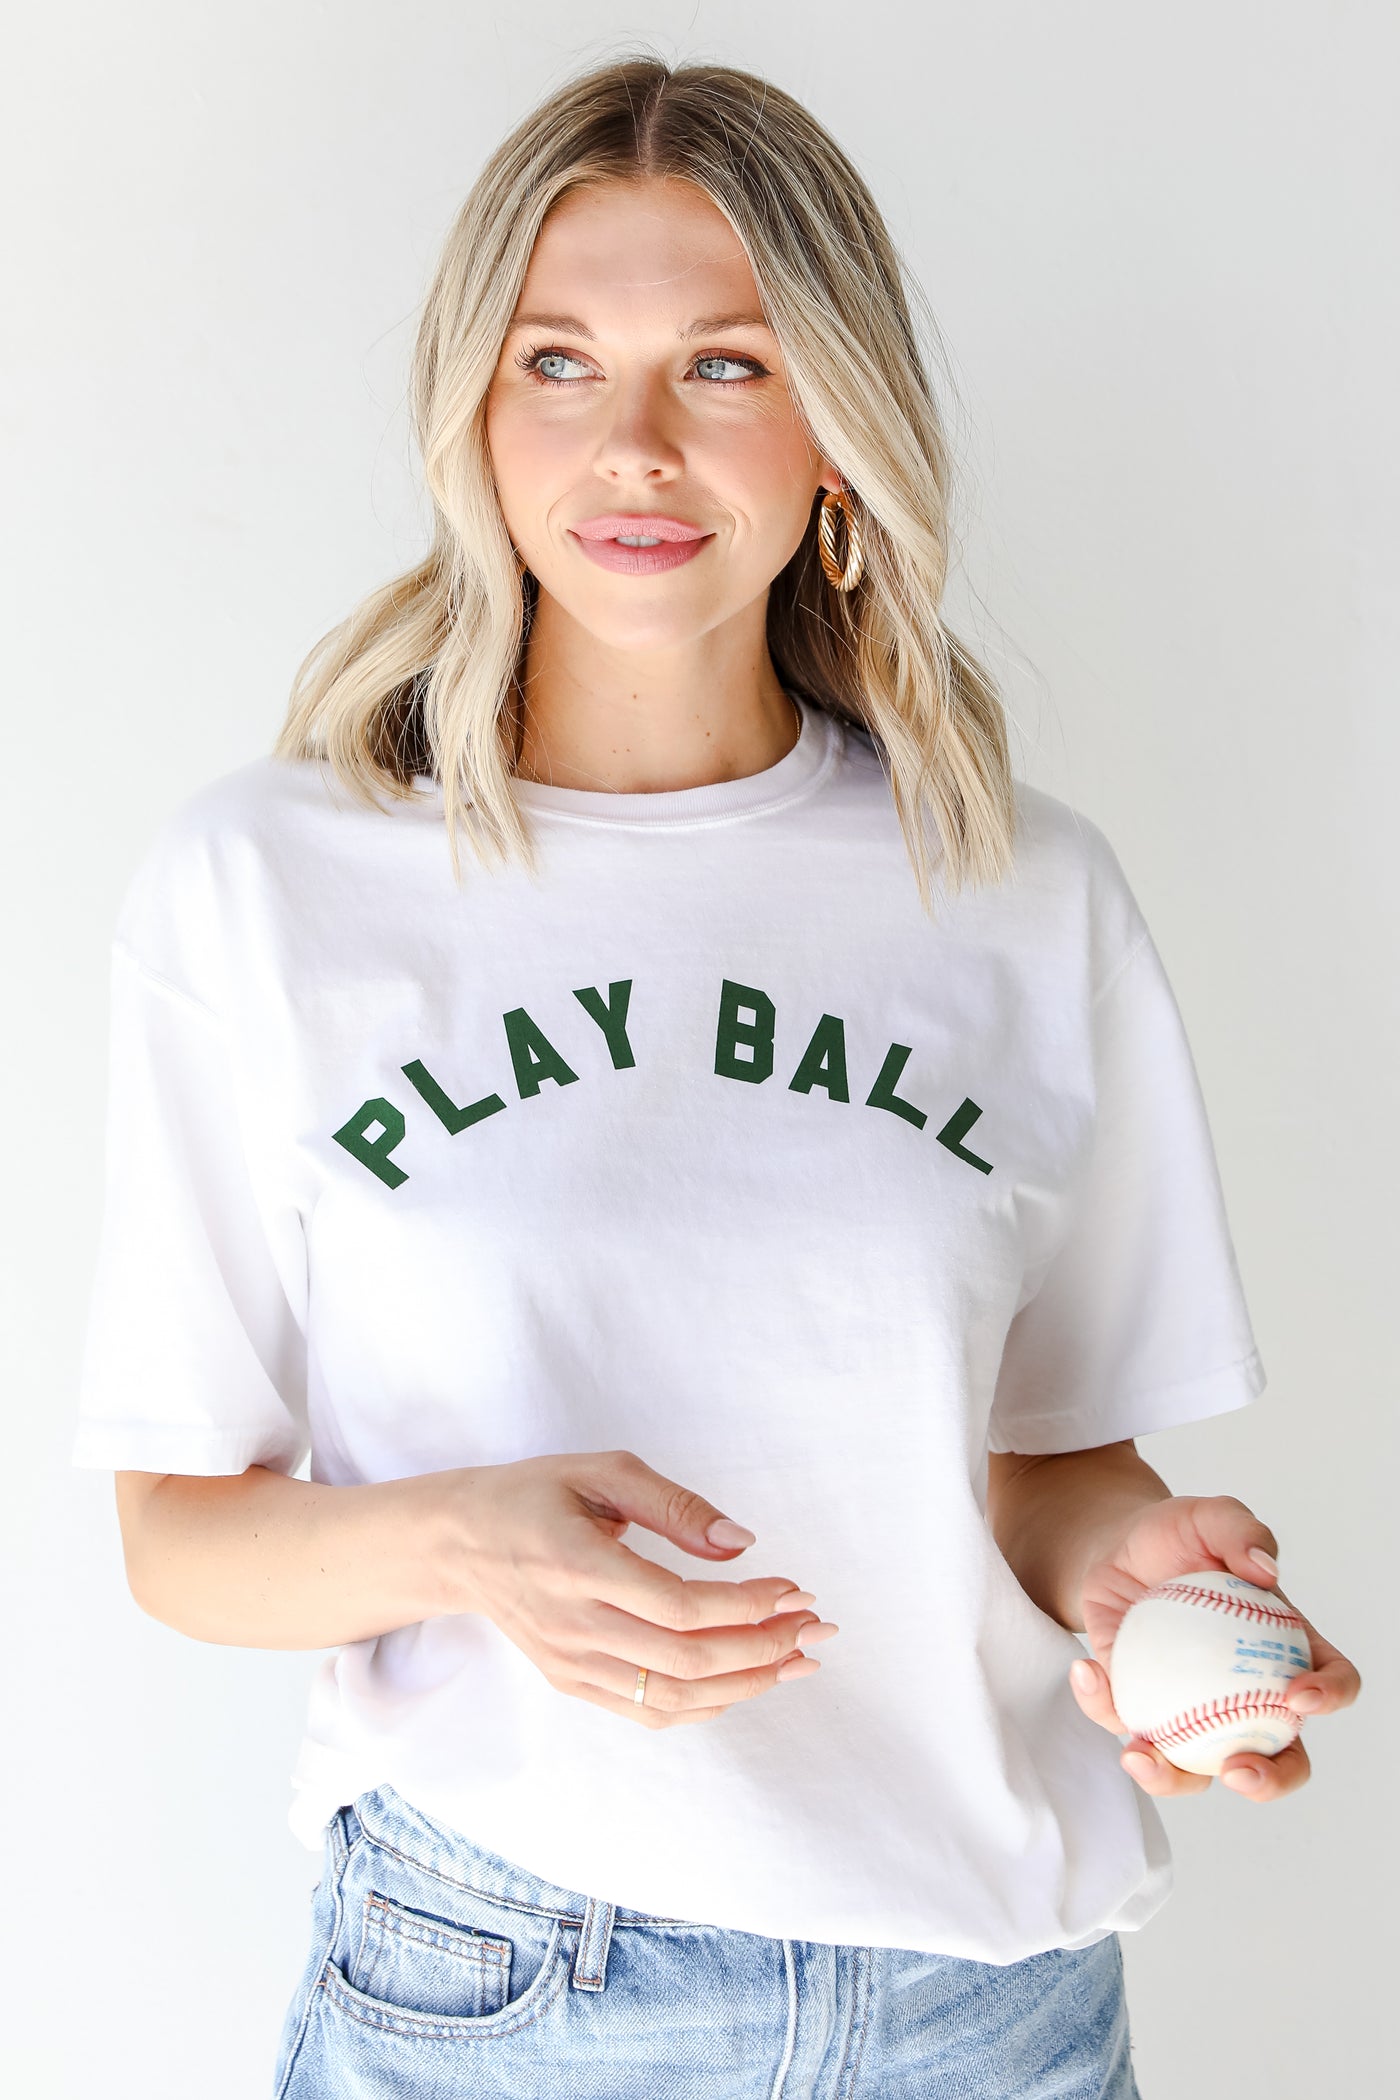 Play Ball Tee front view